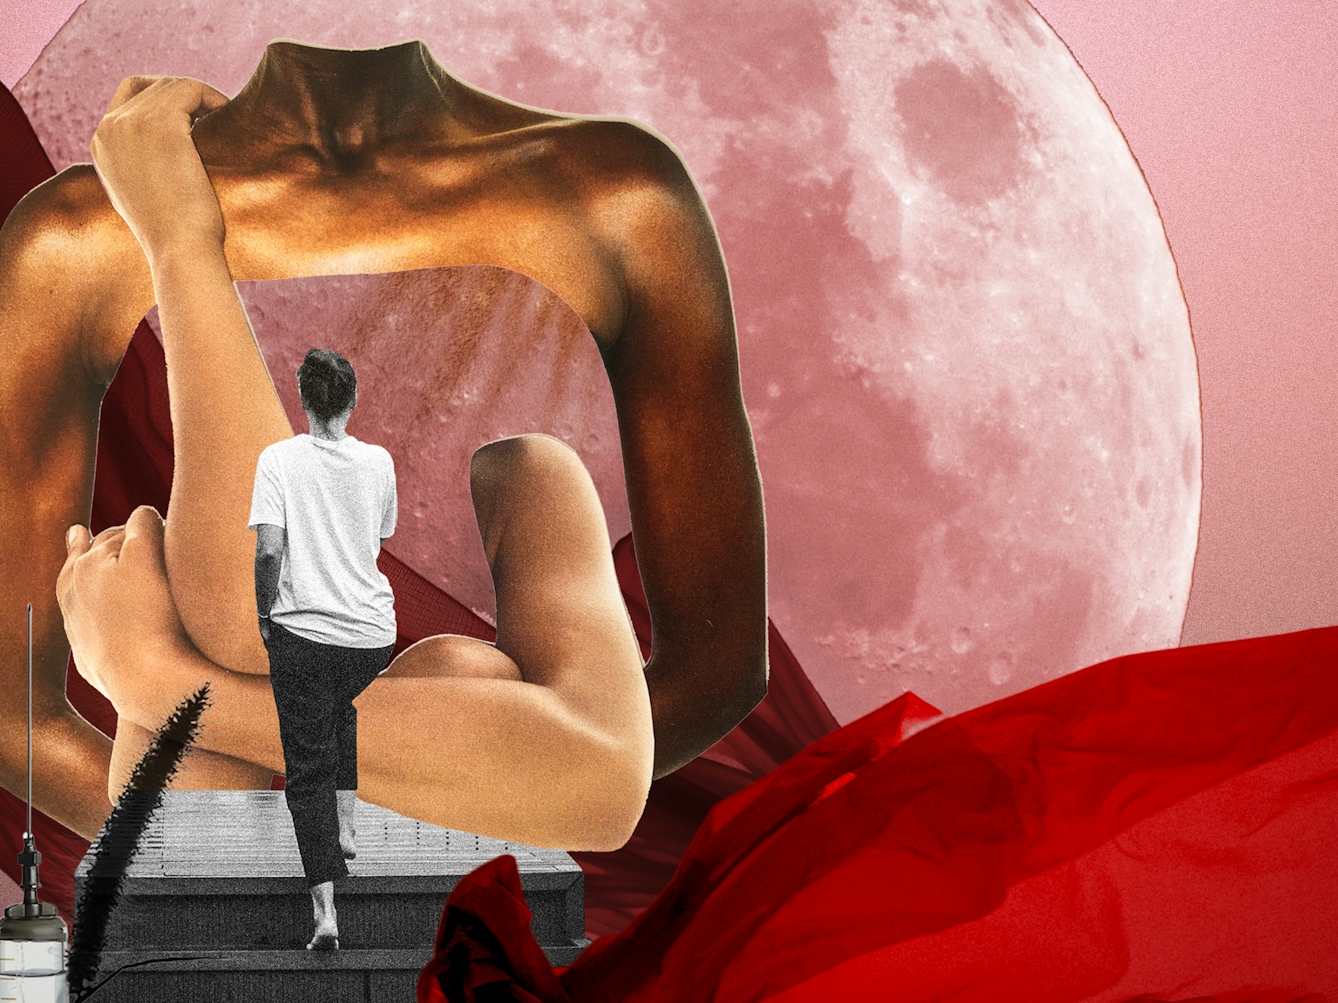 Detail from a larger digital collage artwork made up of pink, red and black and white hues. At the centre is a large image of the moon. Overlaid on top are sheets of red fabric billowing and flowing as if in the wind. In the centre is a staircase rising up. At the top is the back of a woman who has just reach the top. In front of her are fragments of two large female torsos which are transparent and through which the moon behind can be seen.